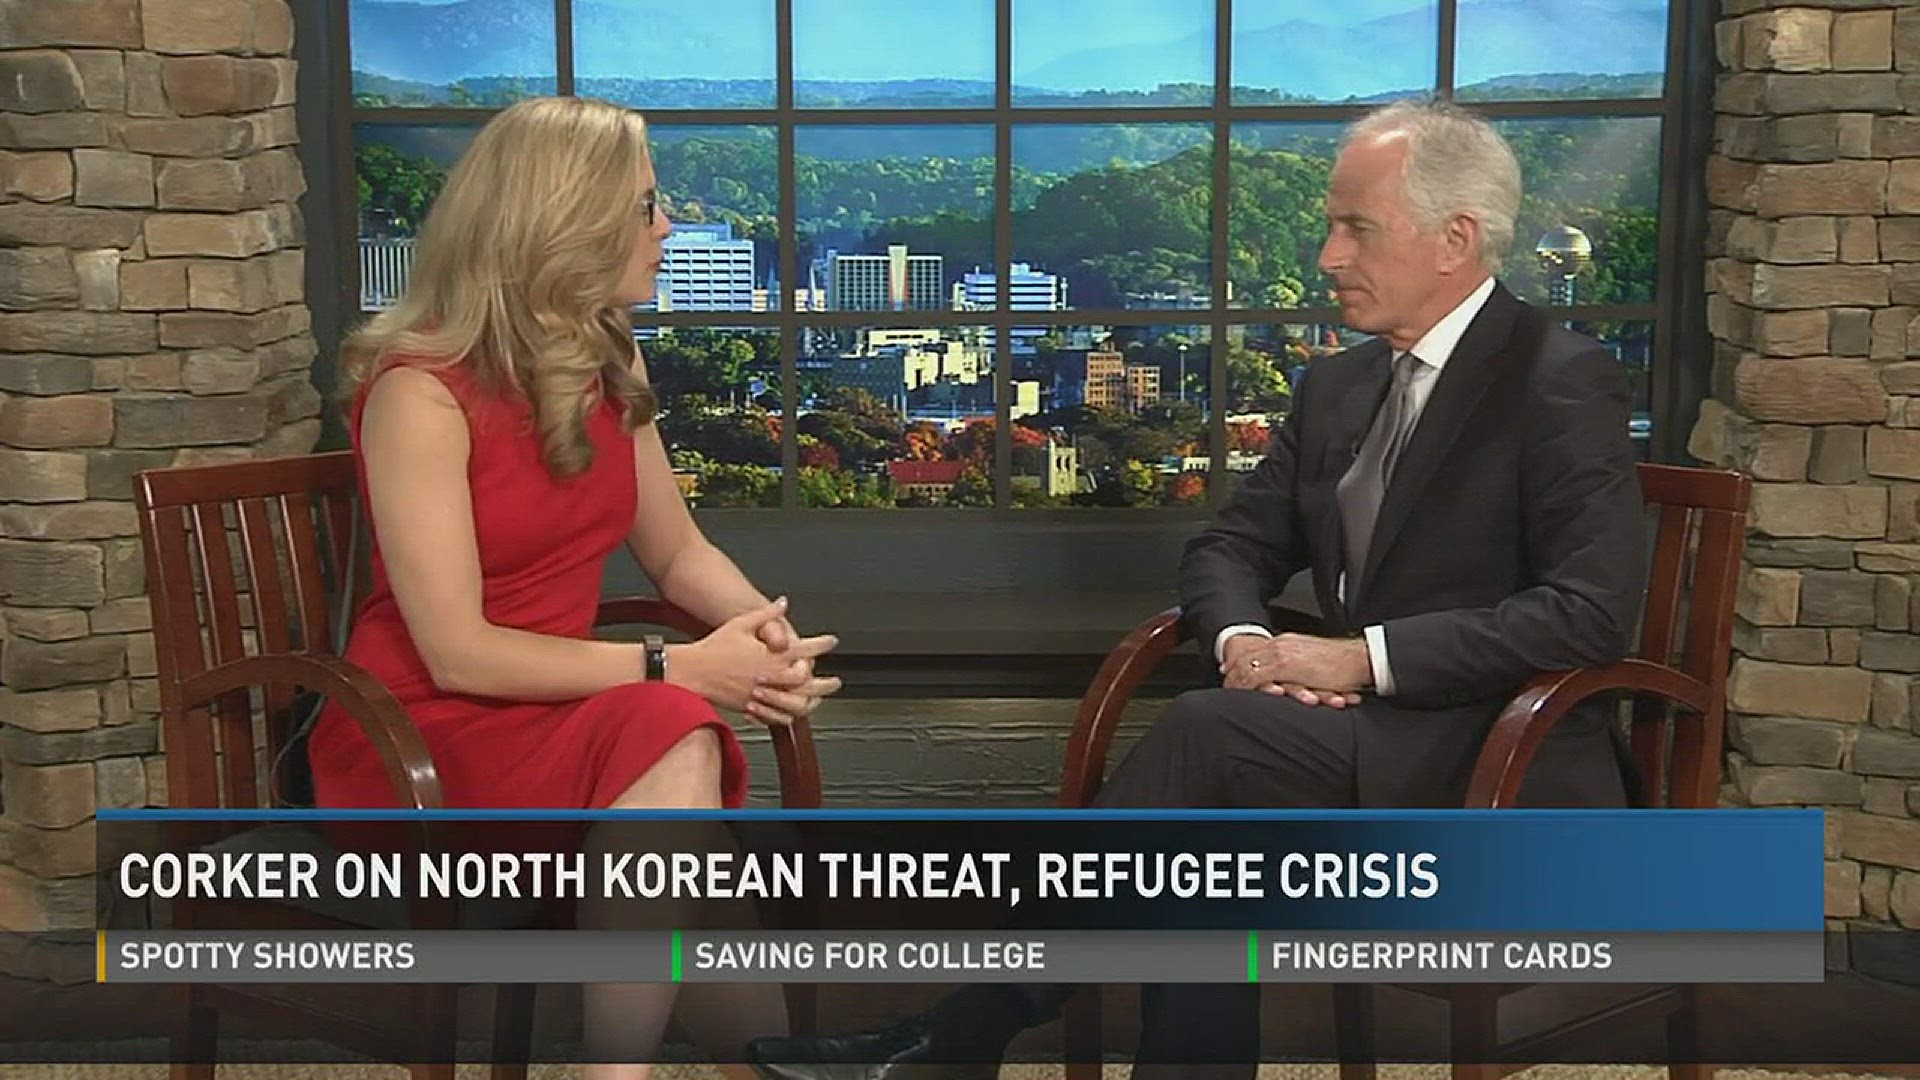 Sen. Bob Corker appeared on 10News at Noon on Friday to discuss the tension between the U.S. and North Korea.